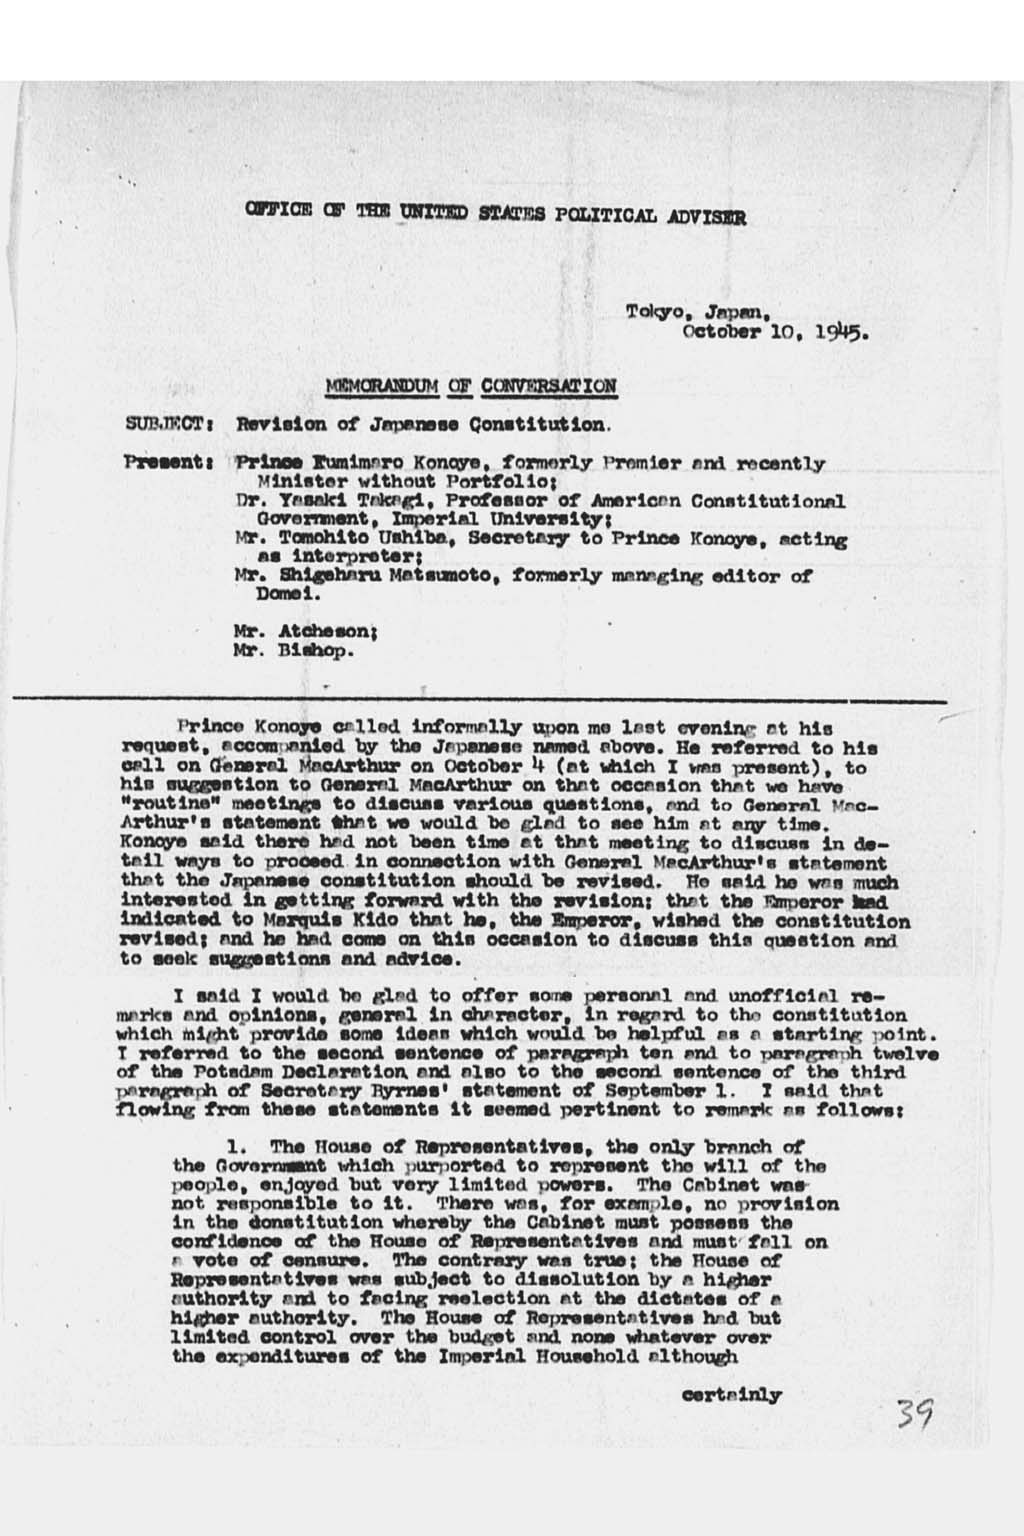 [George Atcheson, Jr. to the Secretary of State, Subject: Revision of Japanese Constitution; Discussion with Prince Konoye](Larger image)